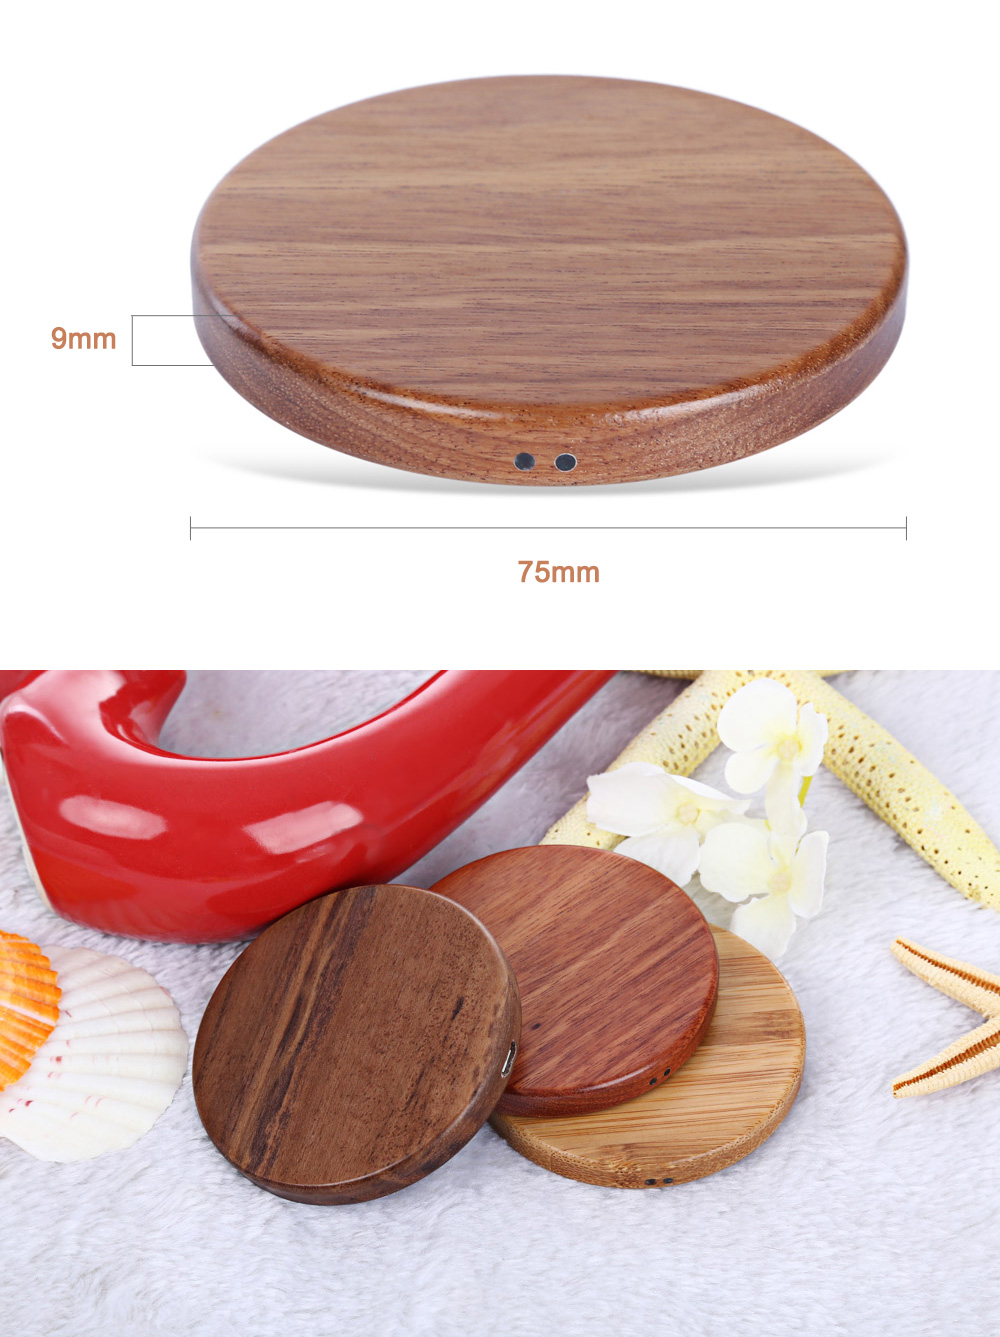 Wooden Mini Qi Wireless Charger Charging Pad